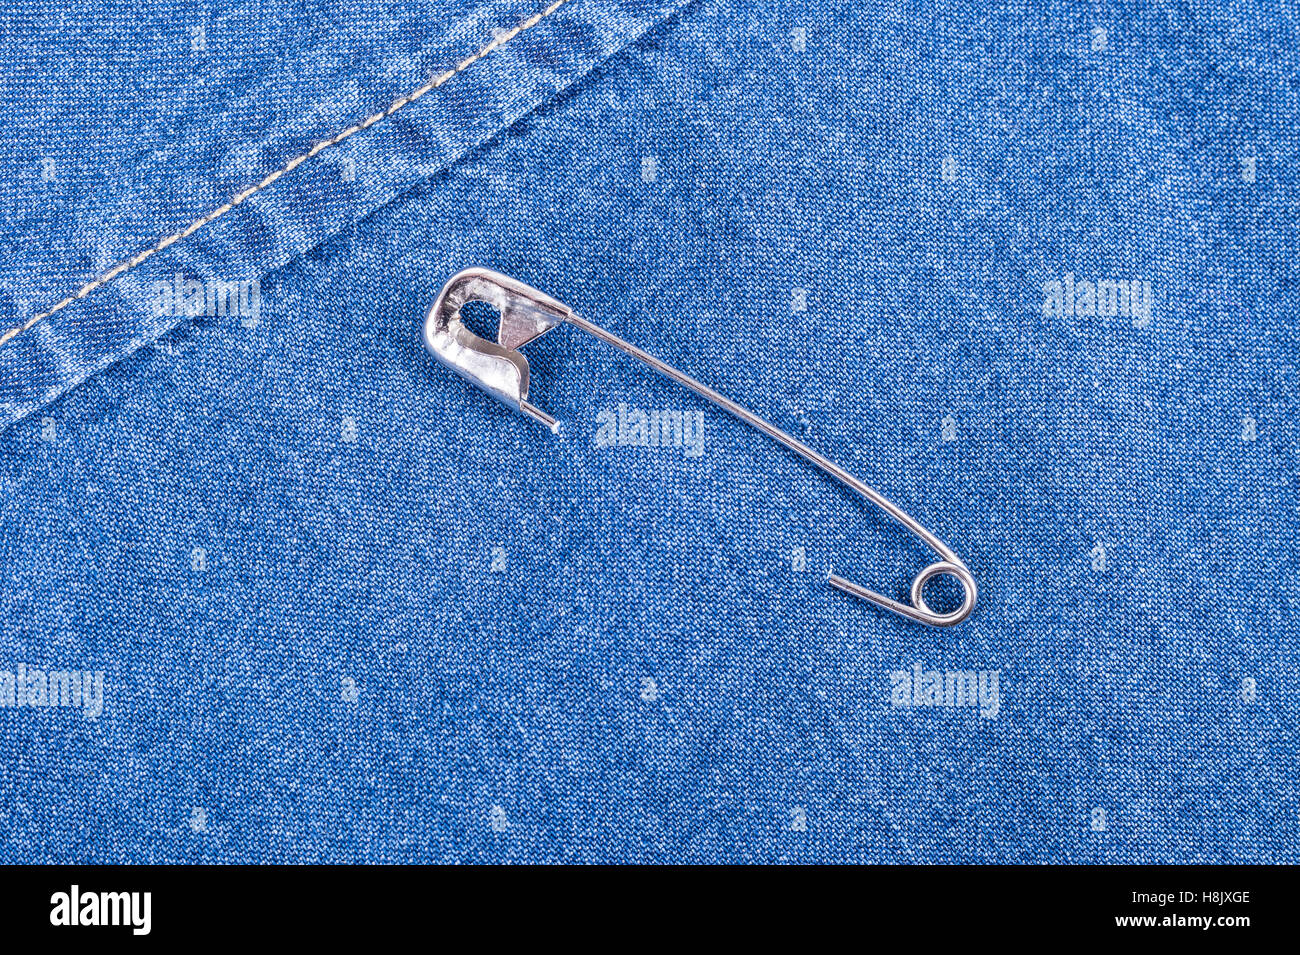 Pin on clothes